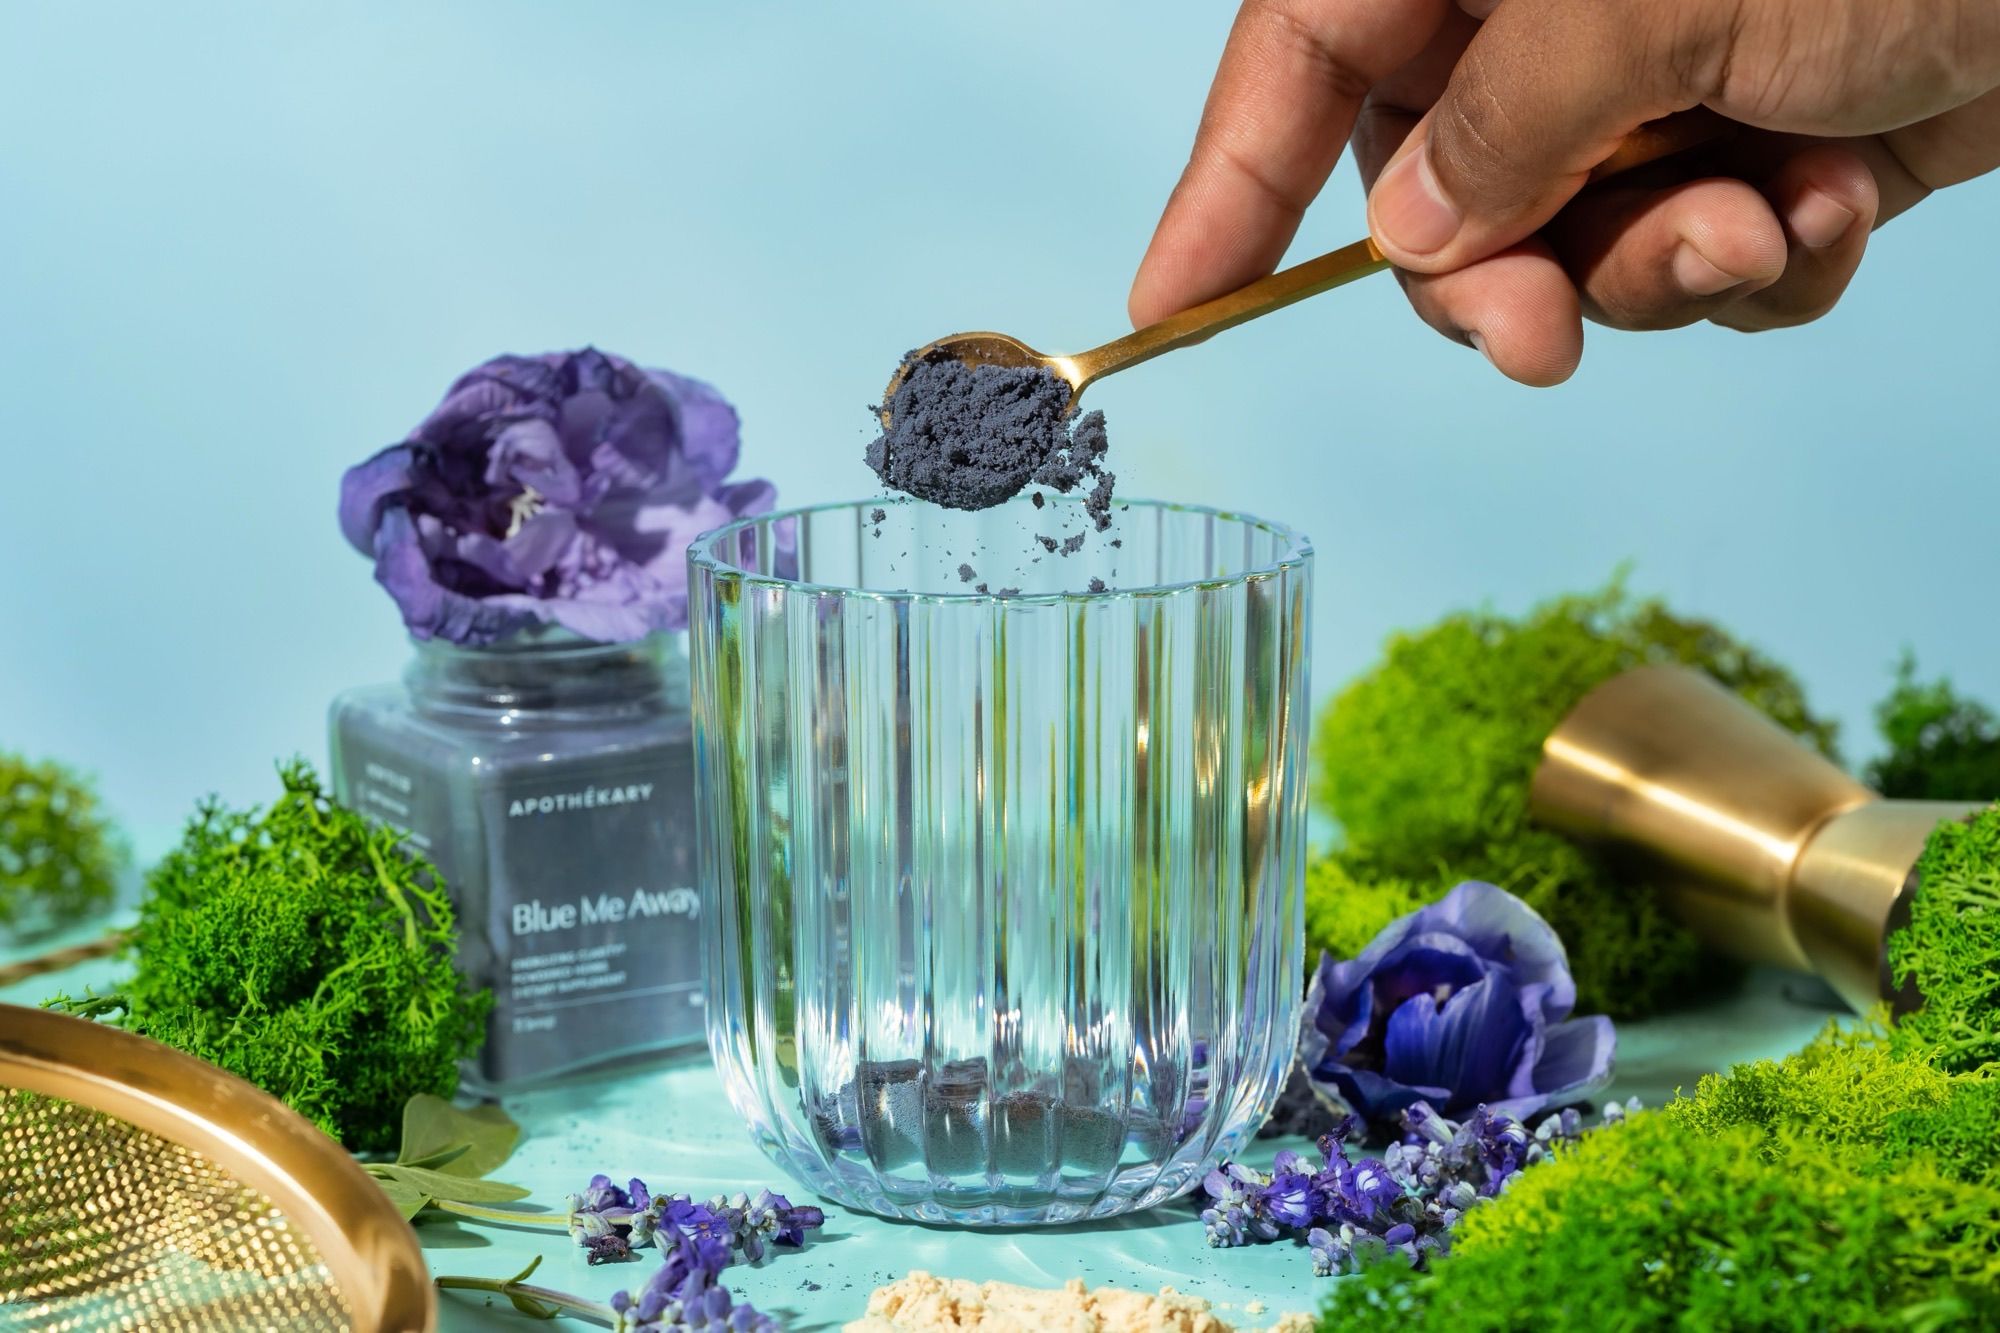 herbs being scooped into a clear glass surrounded by greenery